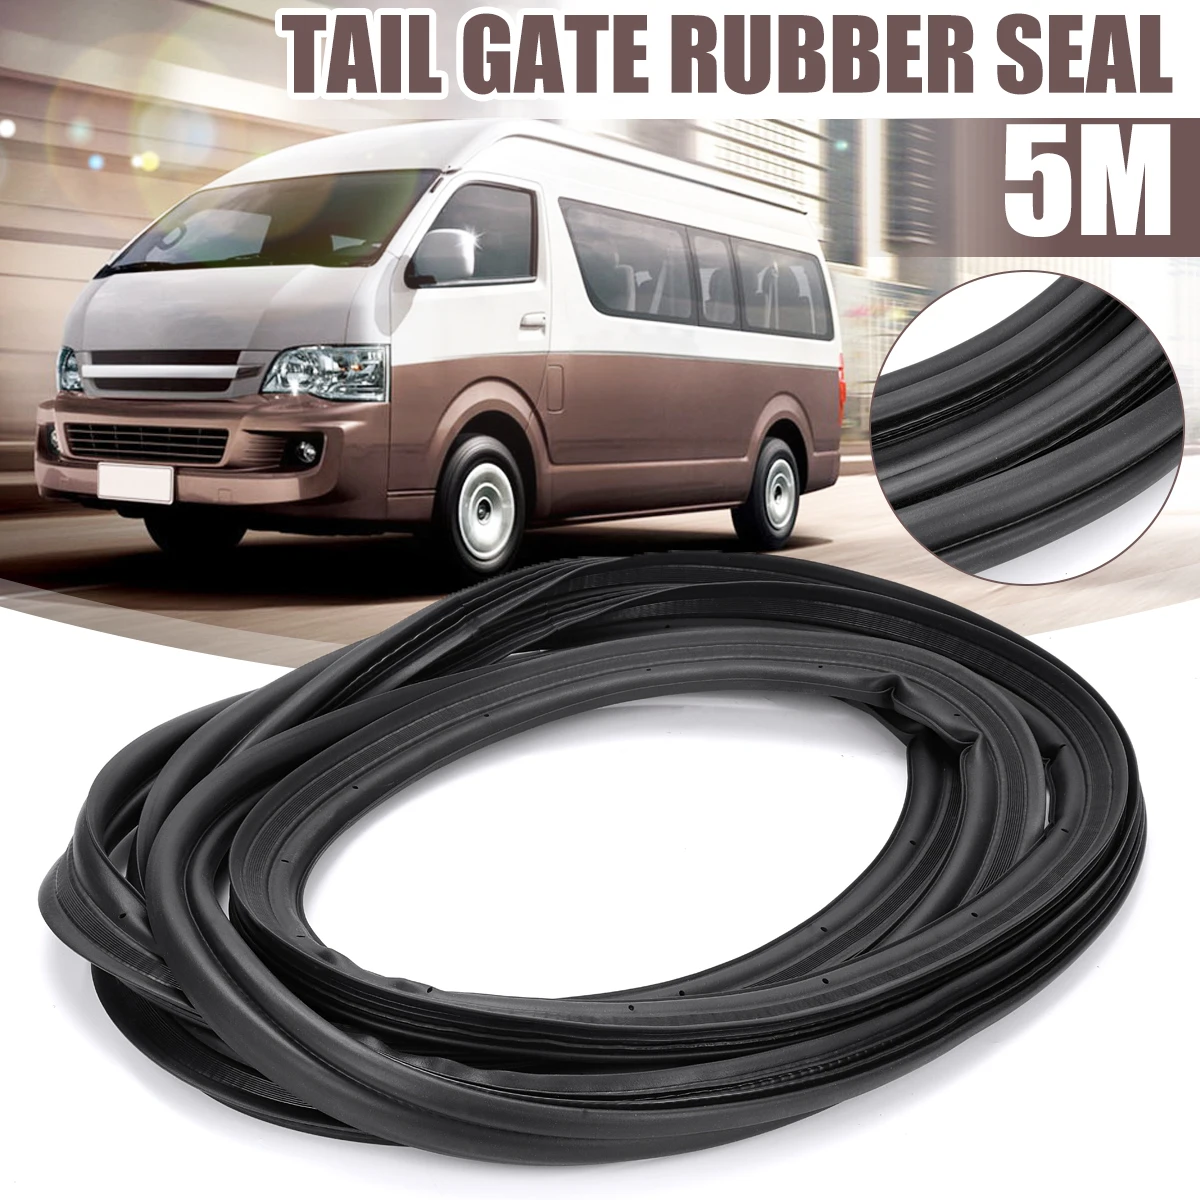 5M Rear Tail Gate Rubber Seal Strip For Toyota Hiace Low Roof 2005 2006 2007 2008 2009 2010 2011 2012 2013 2014 2015 2016 2017